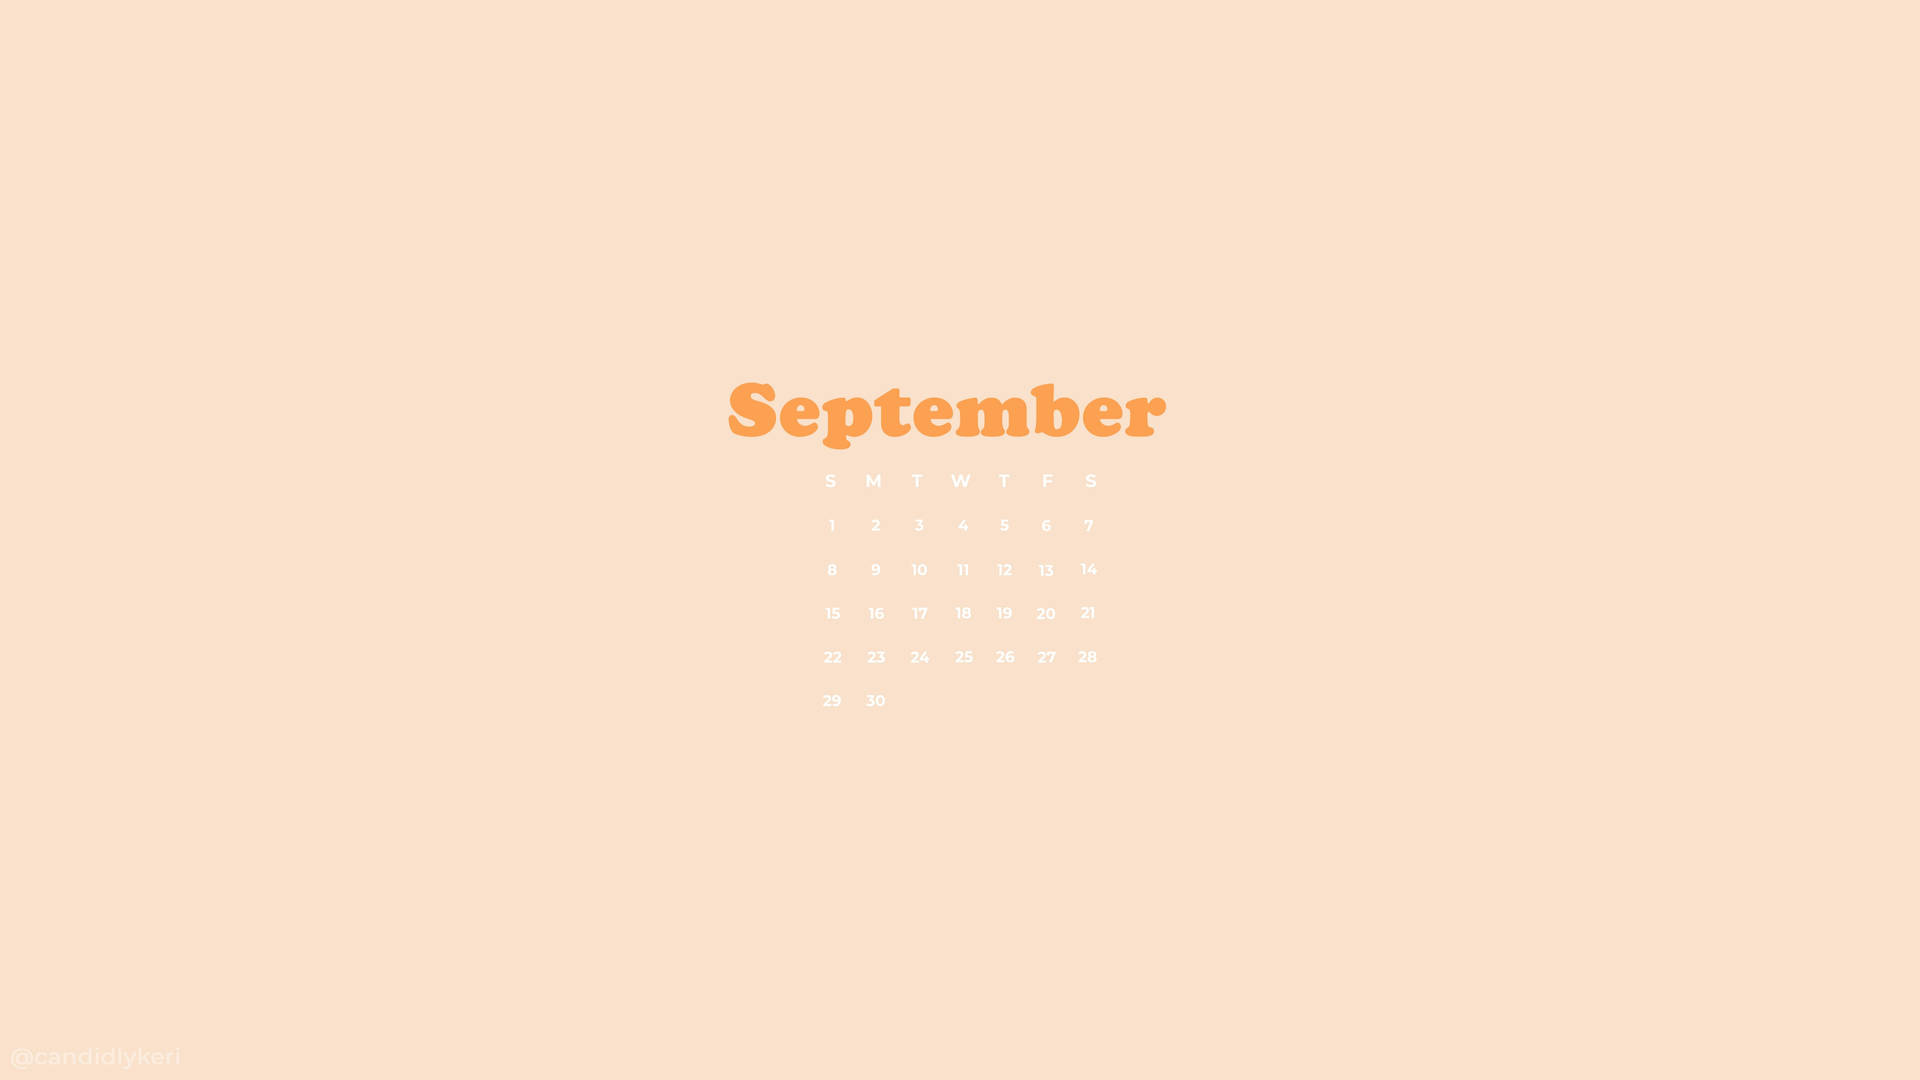 Get Organized For September With This Minimalist Calendar